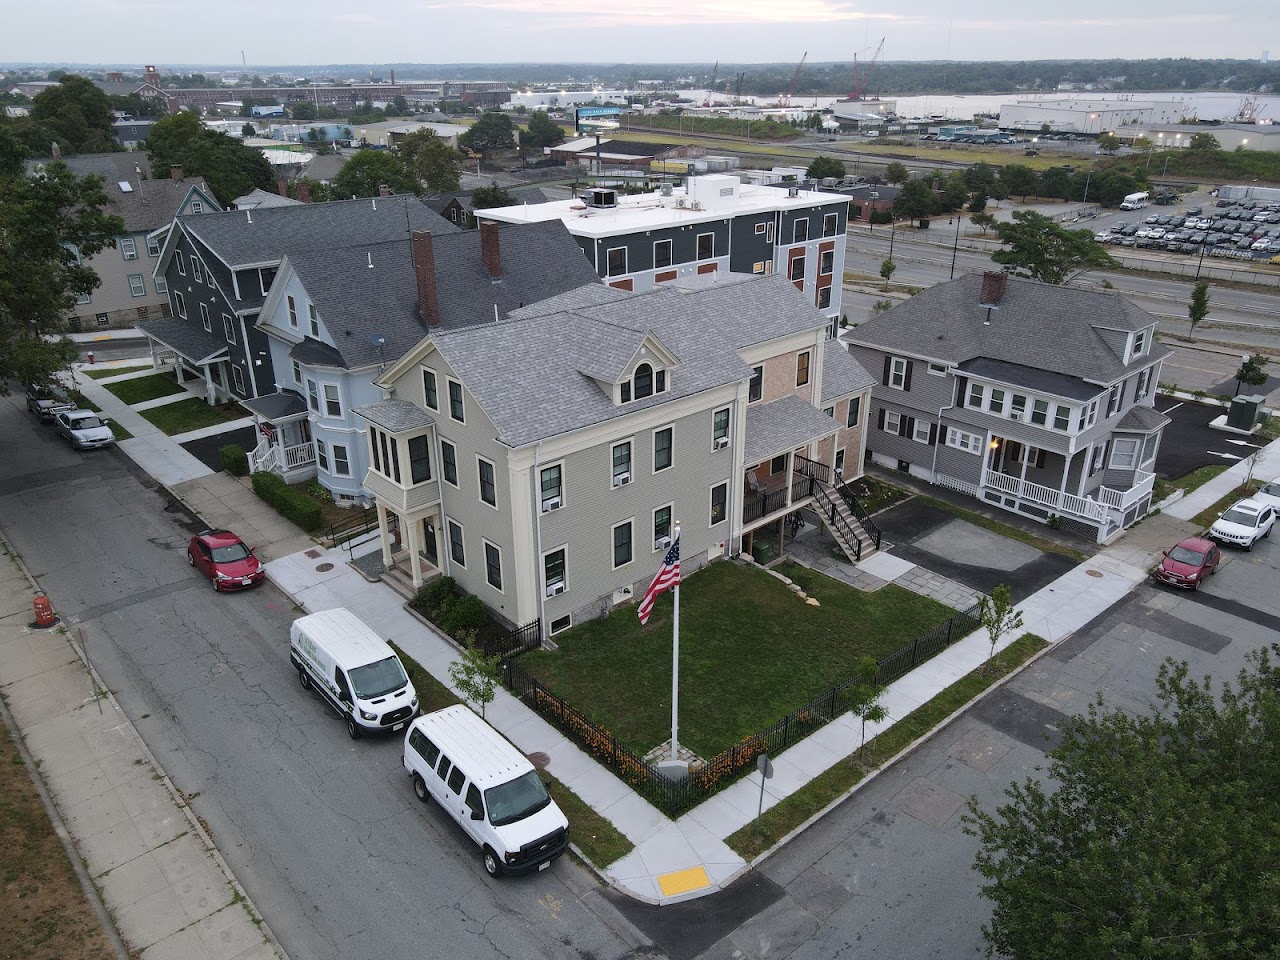 Photo of WILLIS STREET. Affordable housing located at 1333 PURCHASE STREET NEW BEDFORD, MA 02740